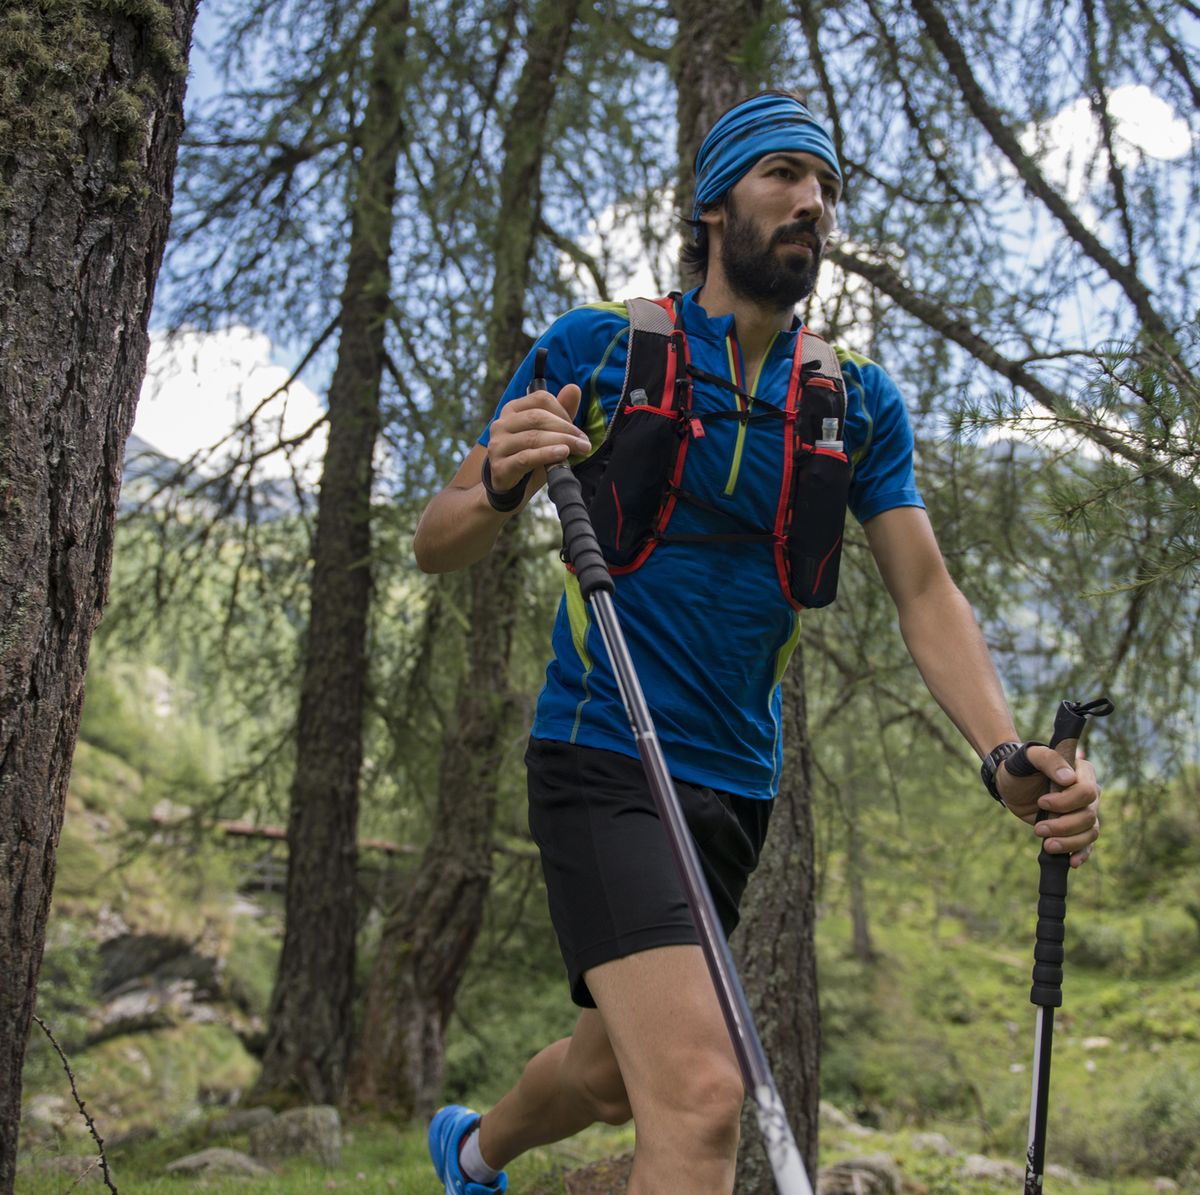 https://hips.hearstapps.com/hmg-prod/images/italy-alagna-trail-runner-on-the-move-in-forest-royalty-free-image-1628144496.jpg?crop=0.670xw:1.00xh;0.199xw,0&resize=1200:*